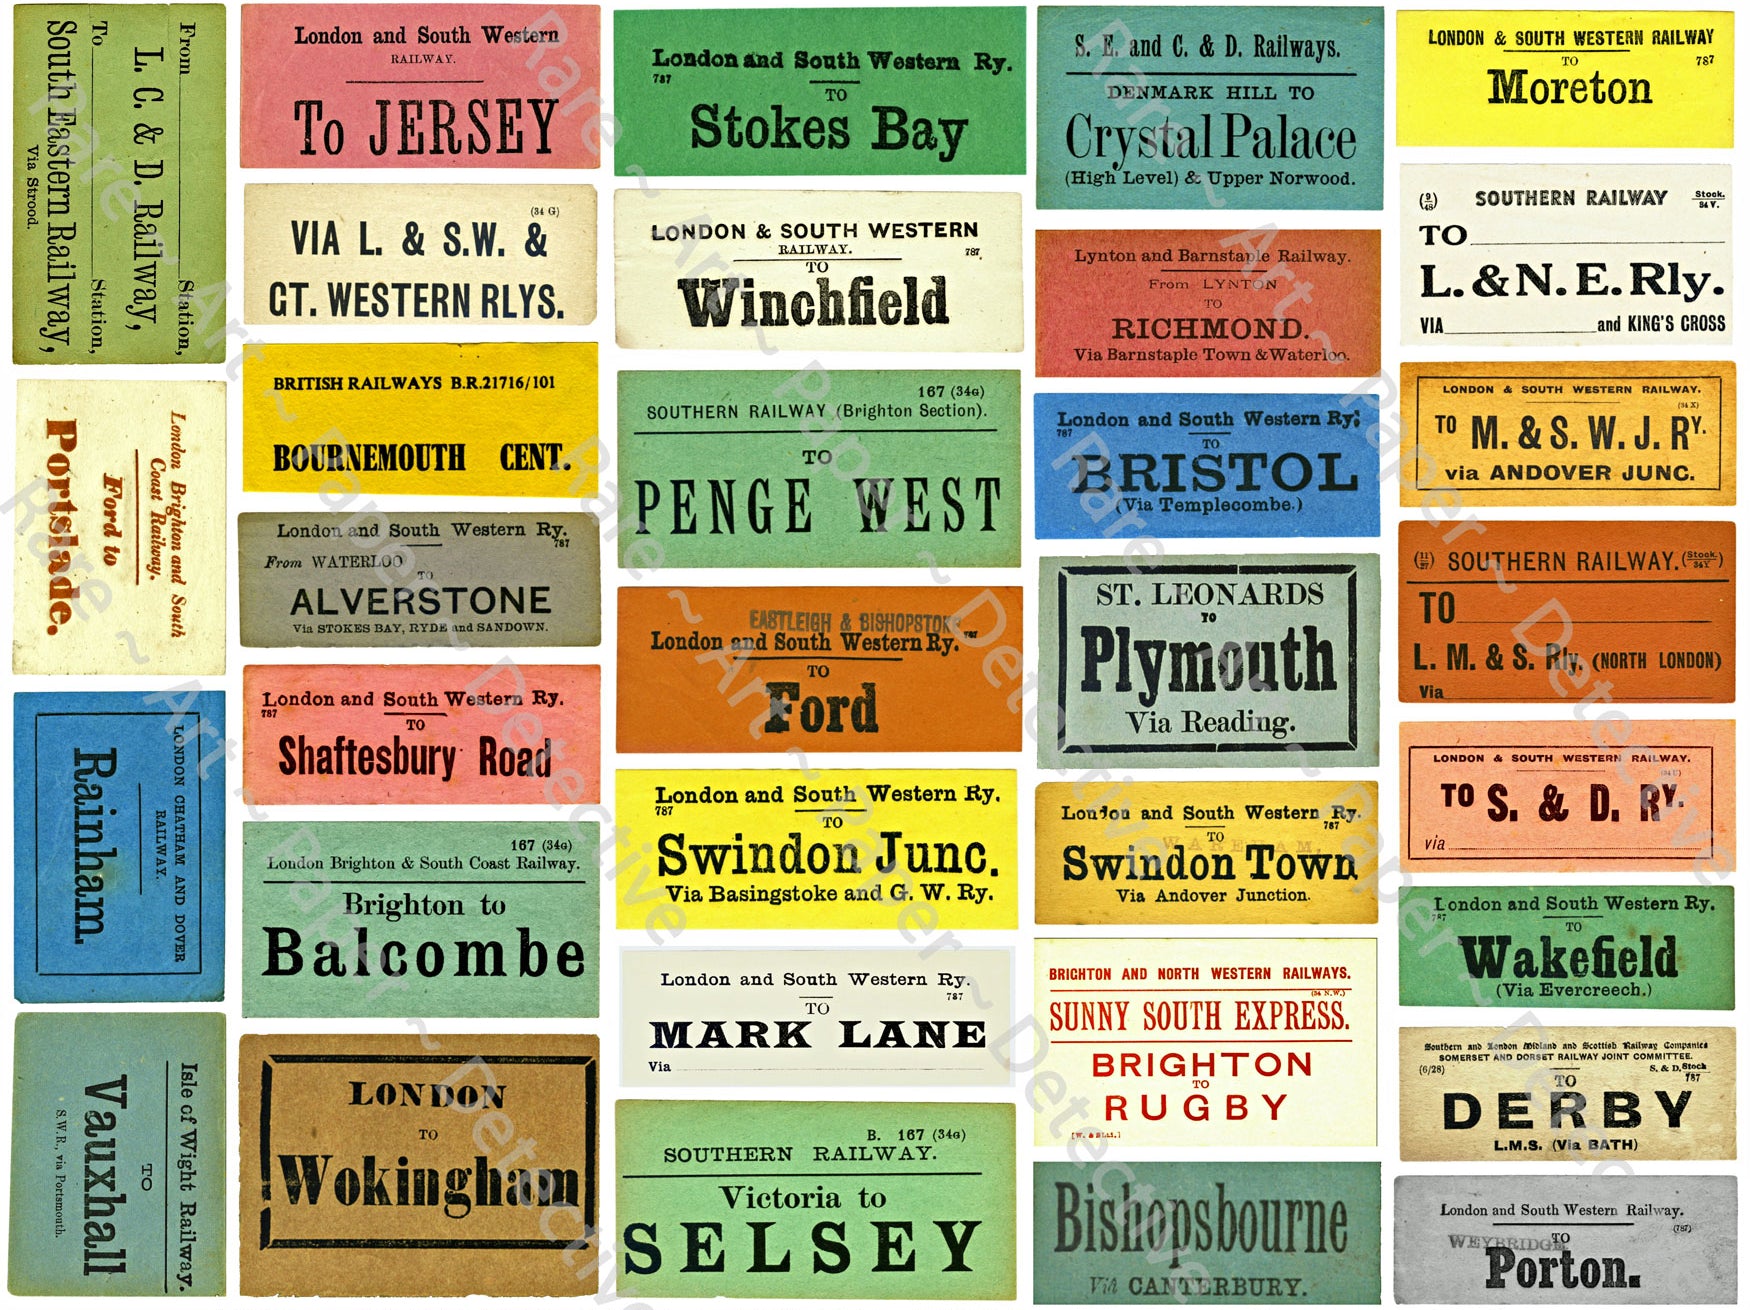 British Railroad Luggage Stickers, Authentic Looking & Colorful Travel Labels, 8.5" x 11" Decal Sheet for Suitcases, #772